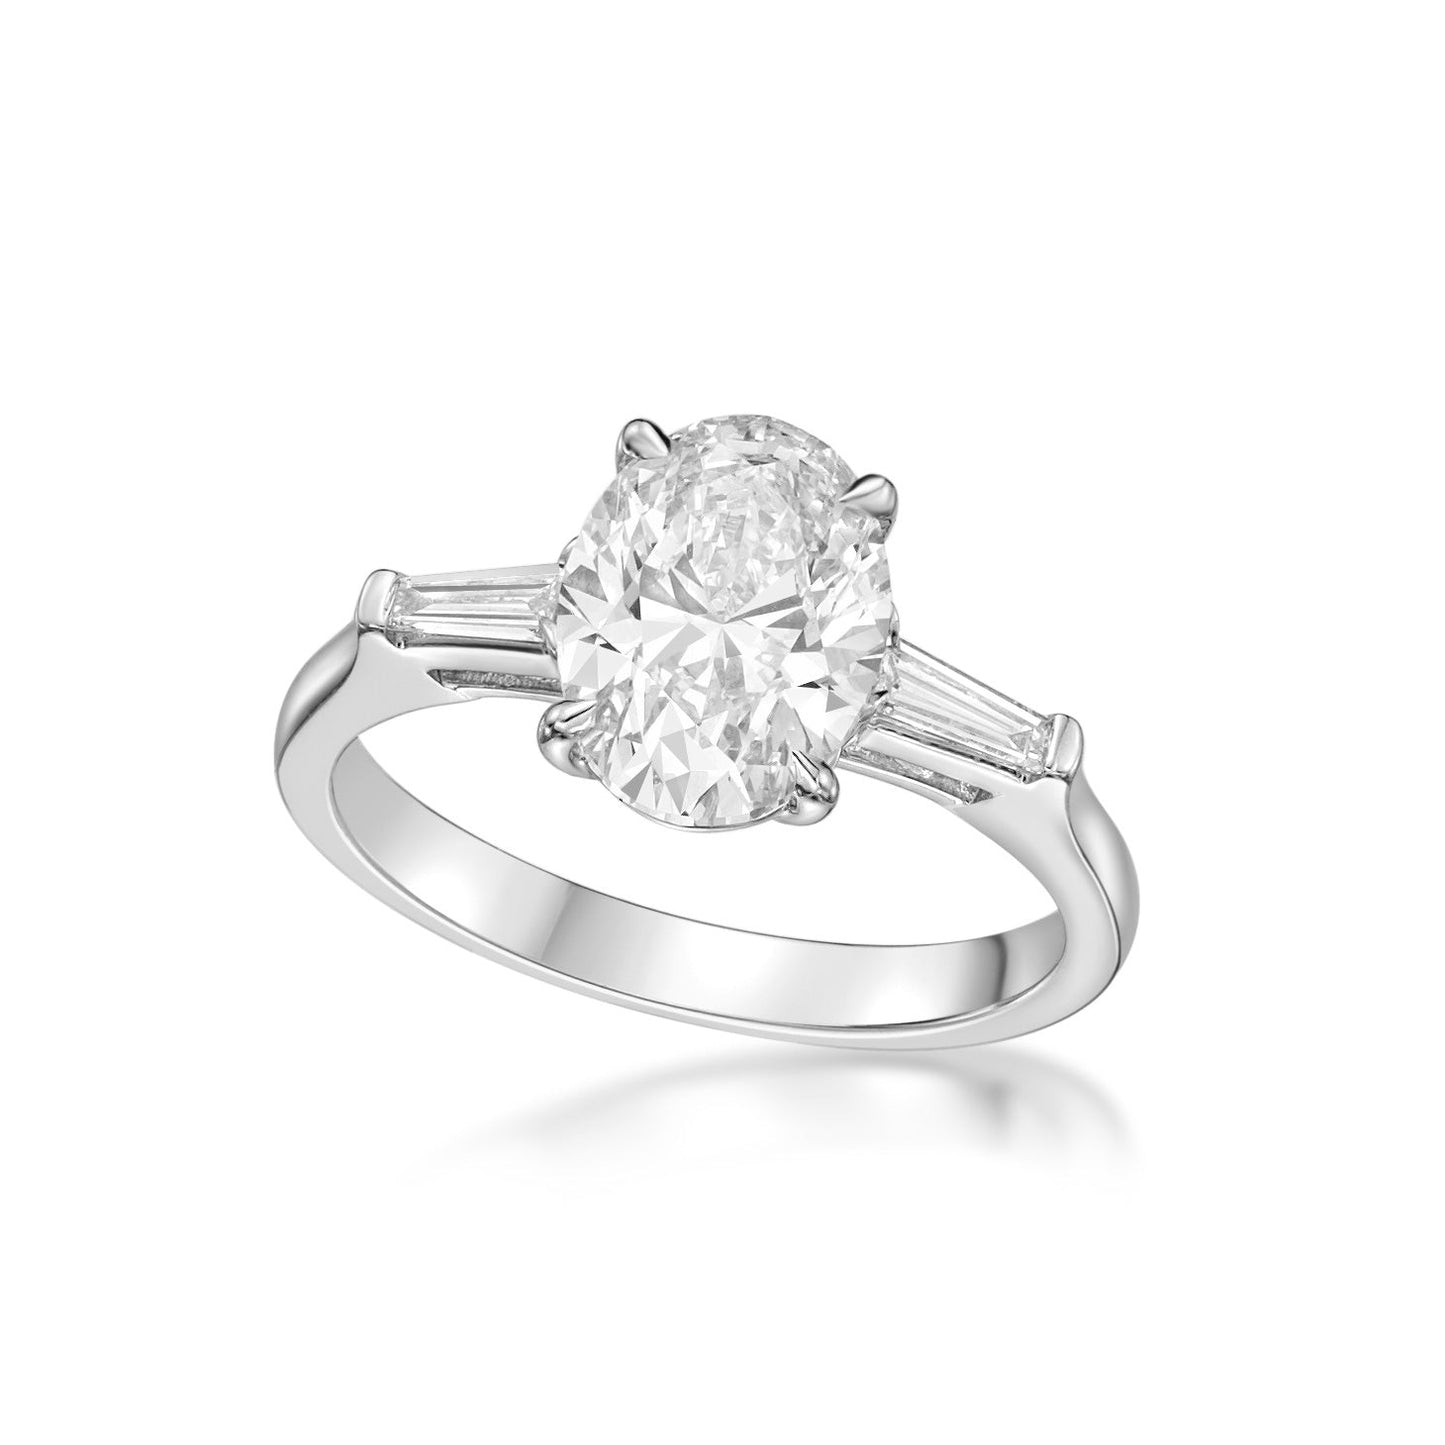 2.01ct Oval Brilliant diamond in a handmade 18K White Gold basket setting with 15pt Tapered baguette diamond sidestones